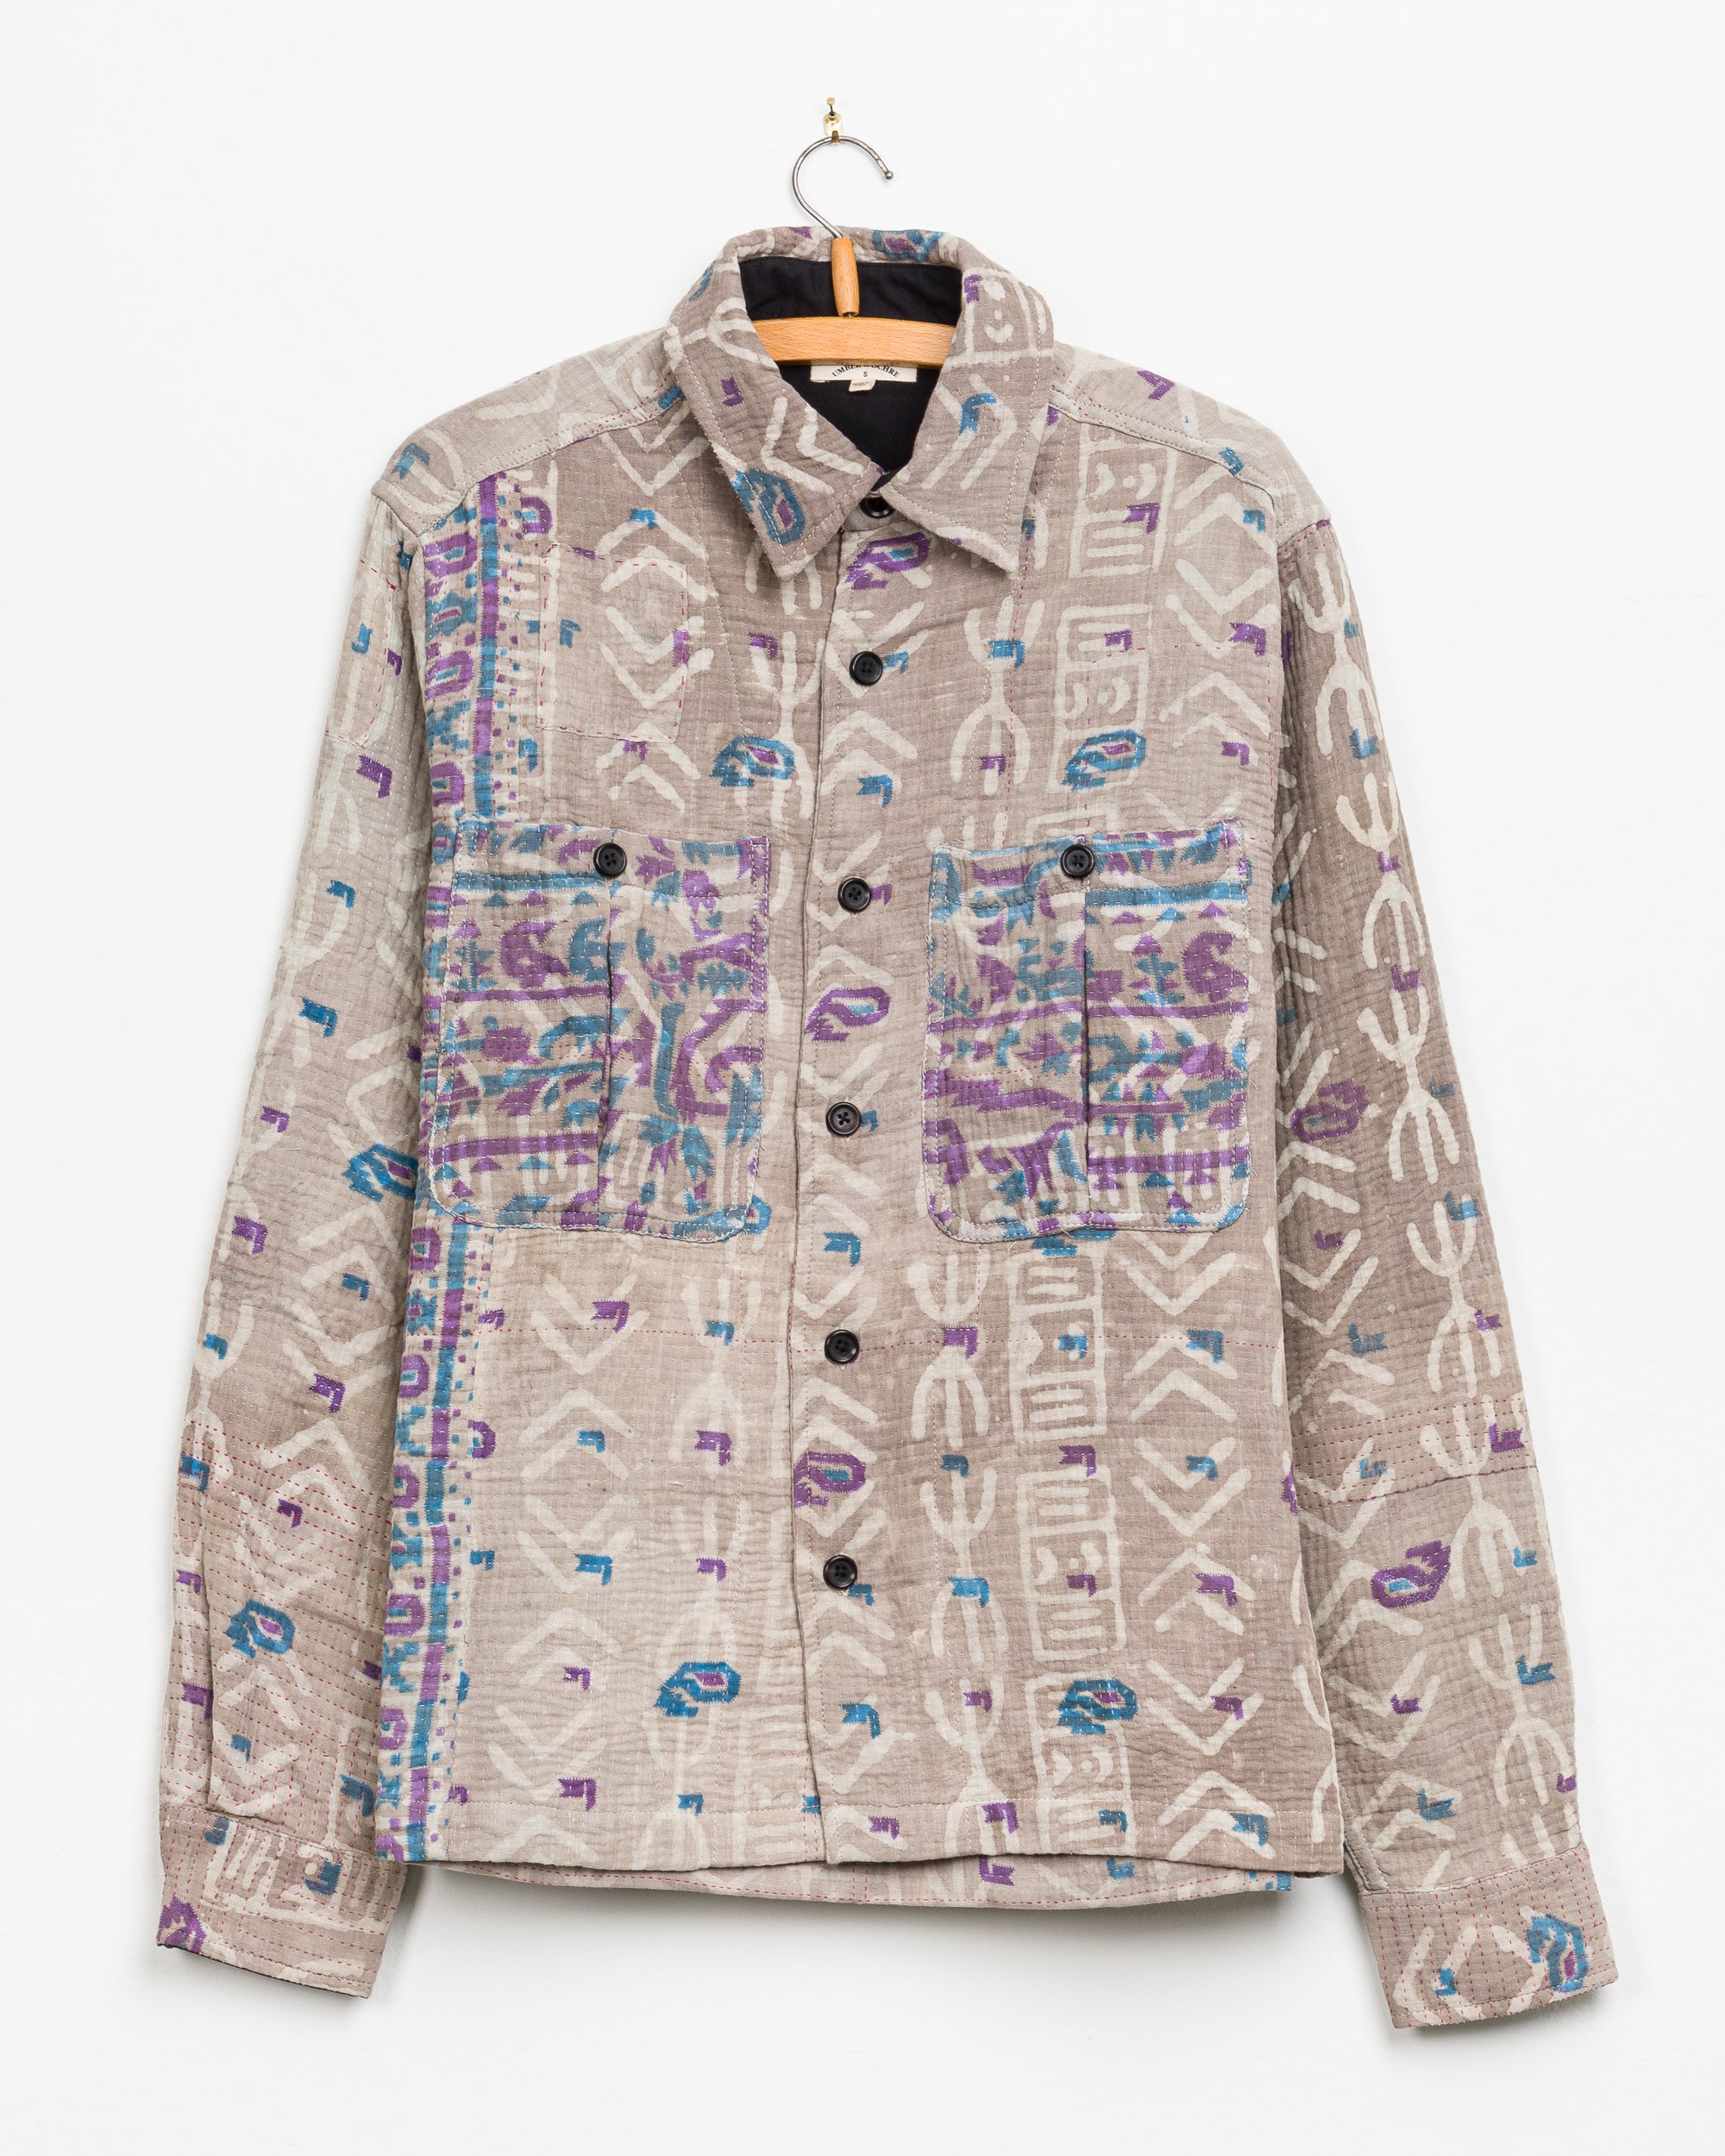 Vivek Overshirt in Quilted Kantha - S